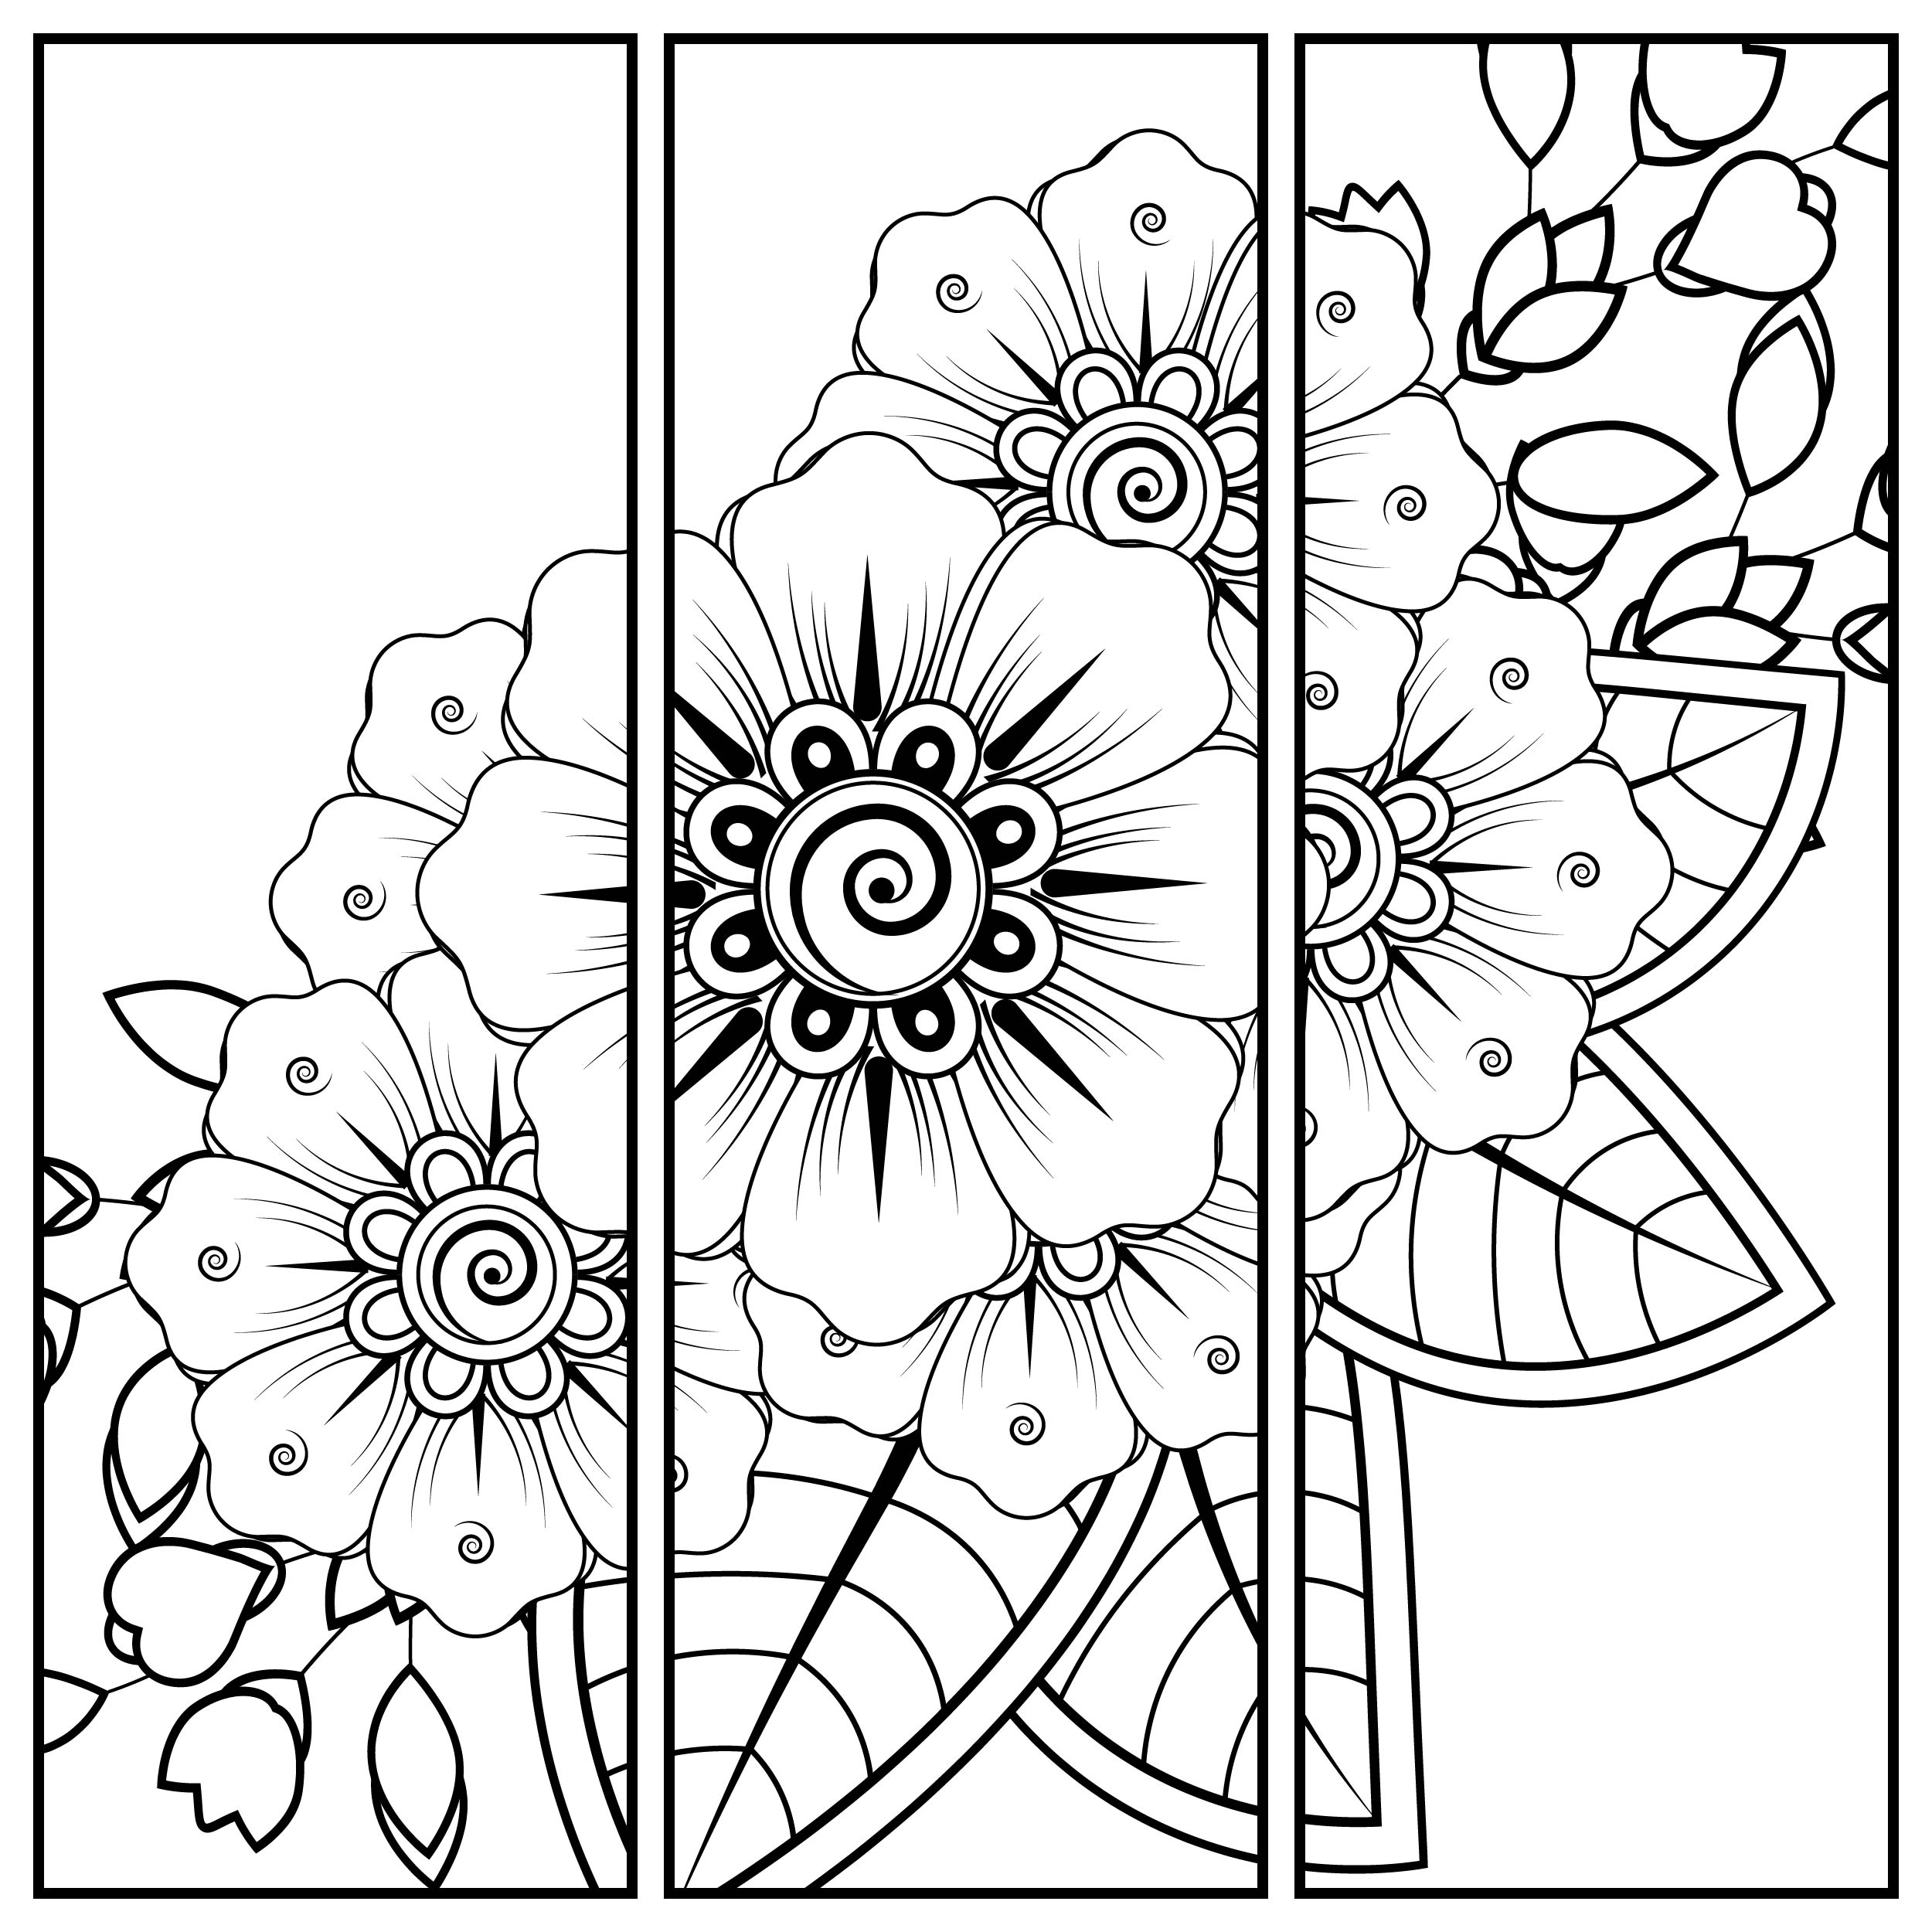 Coloring Book Outline Hand Draw Online Coloring Page HiColoring com